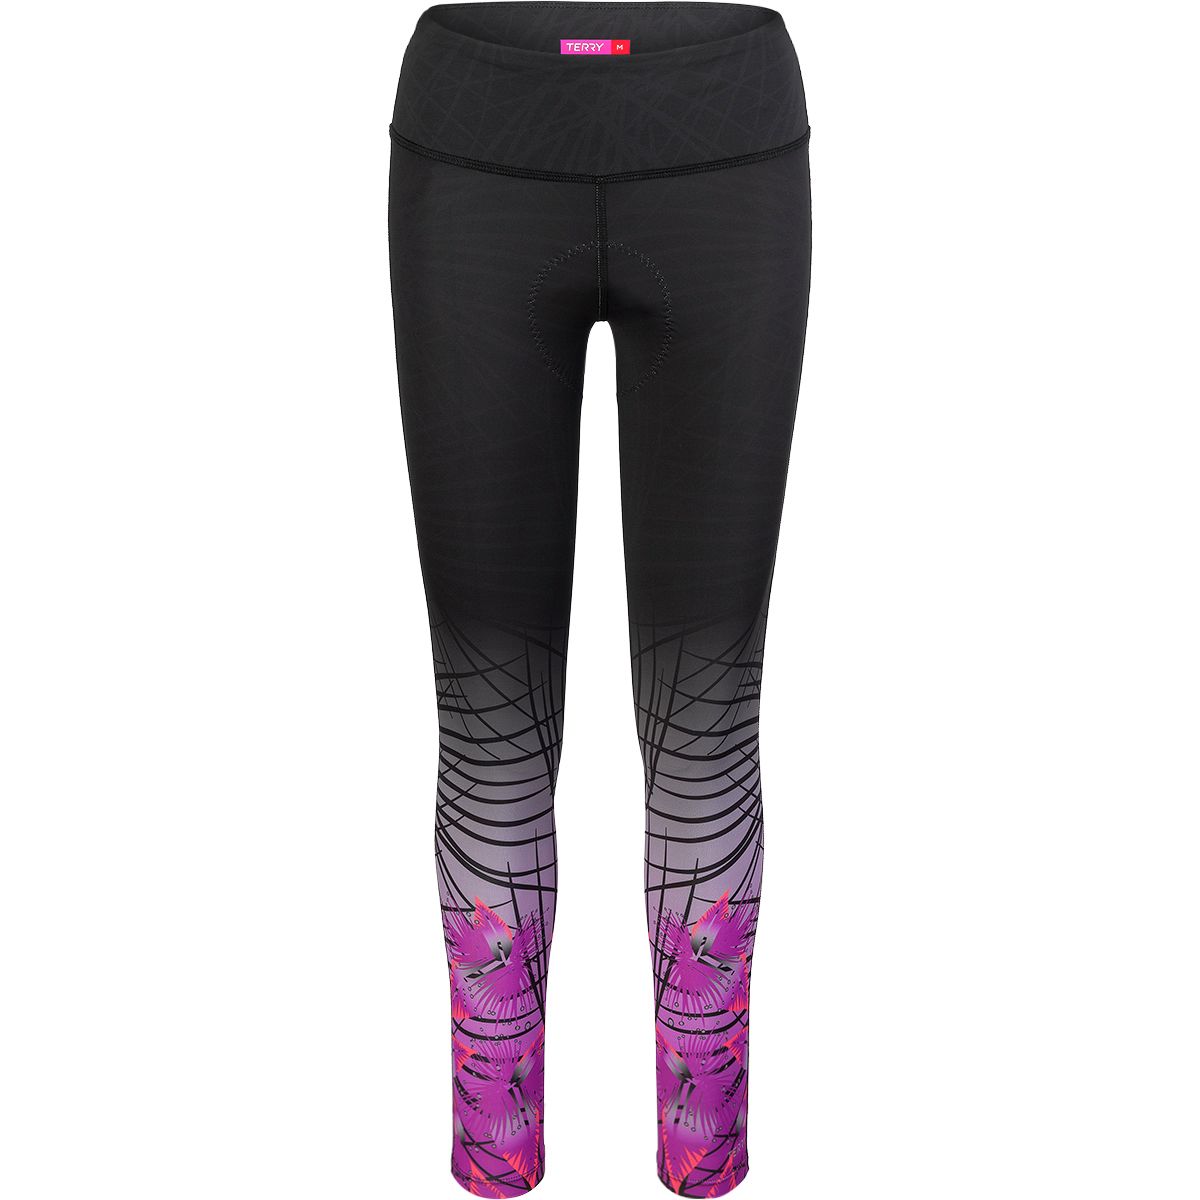 Terry Bicycles Psychlo Tight - Women's